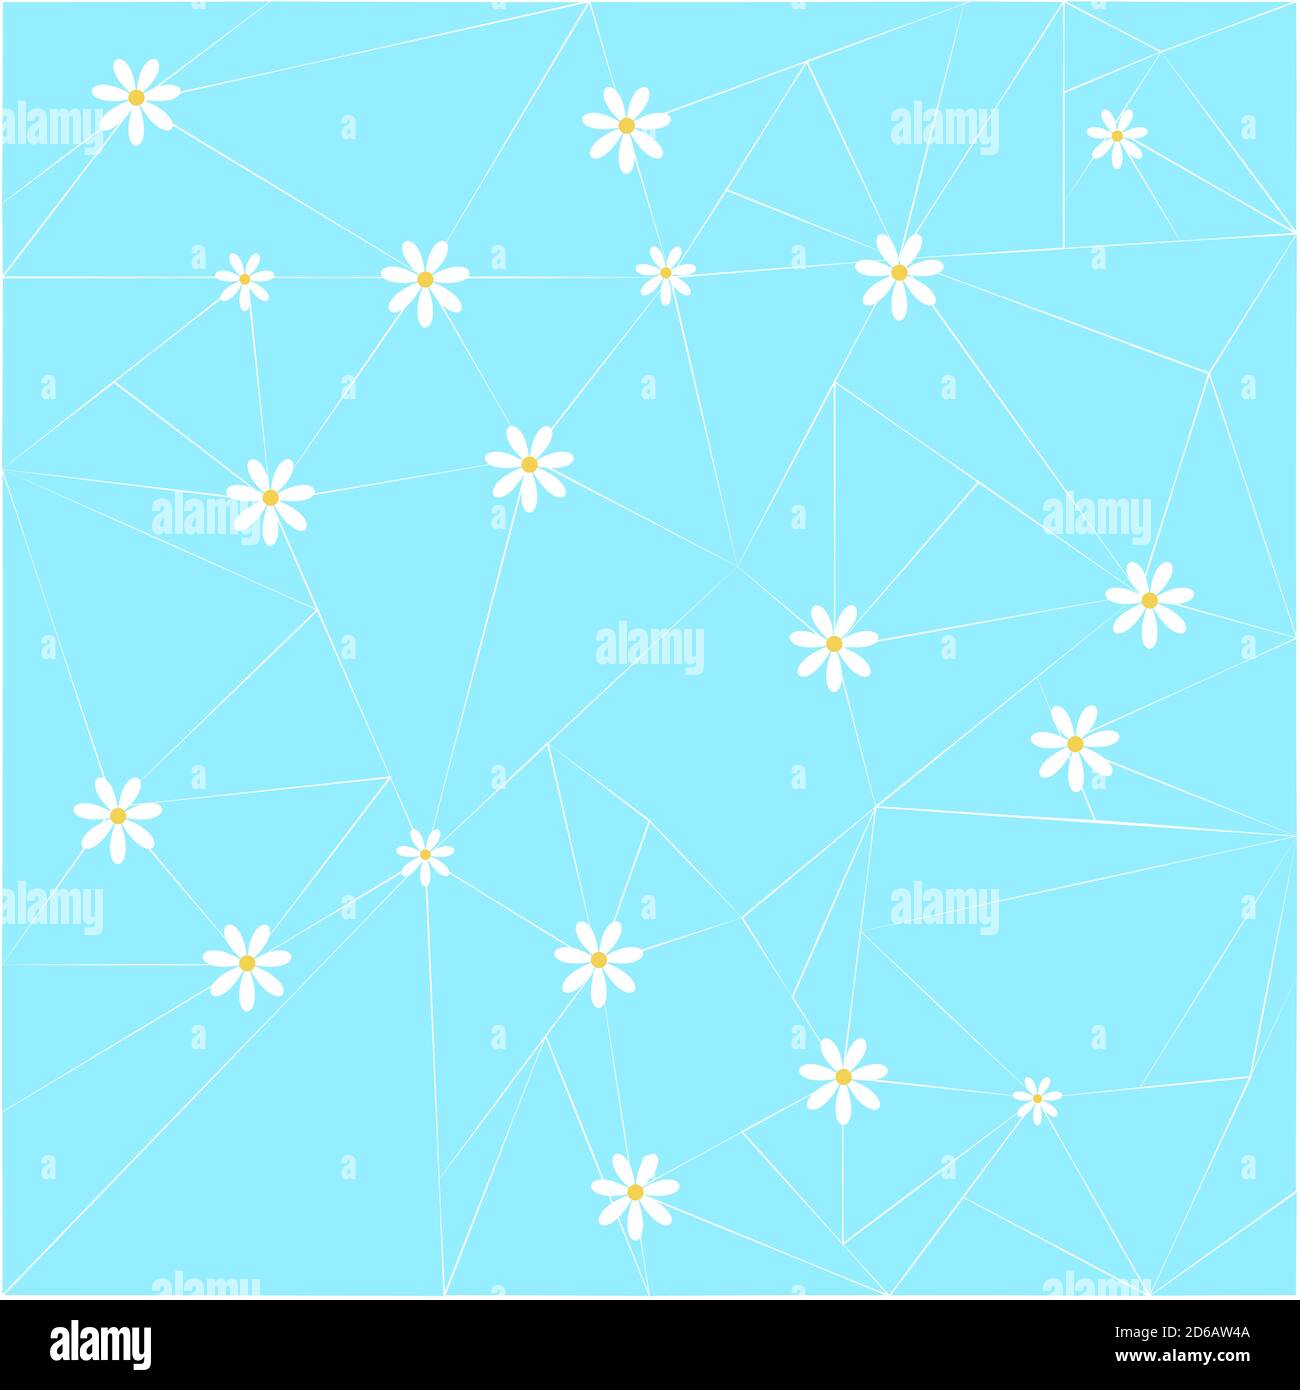 Background with cute daisy pattern. Great for Baby Shower, Wedding, Birthday, Mother's Day, Easter, Scrapbook, Gift Wrap, surface textures. See my Stock Vector